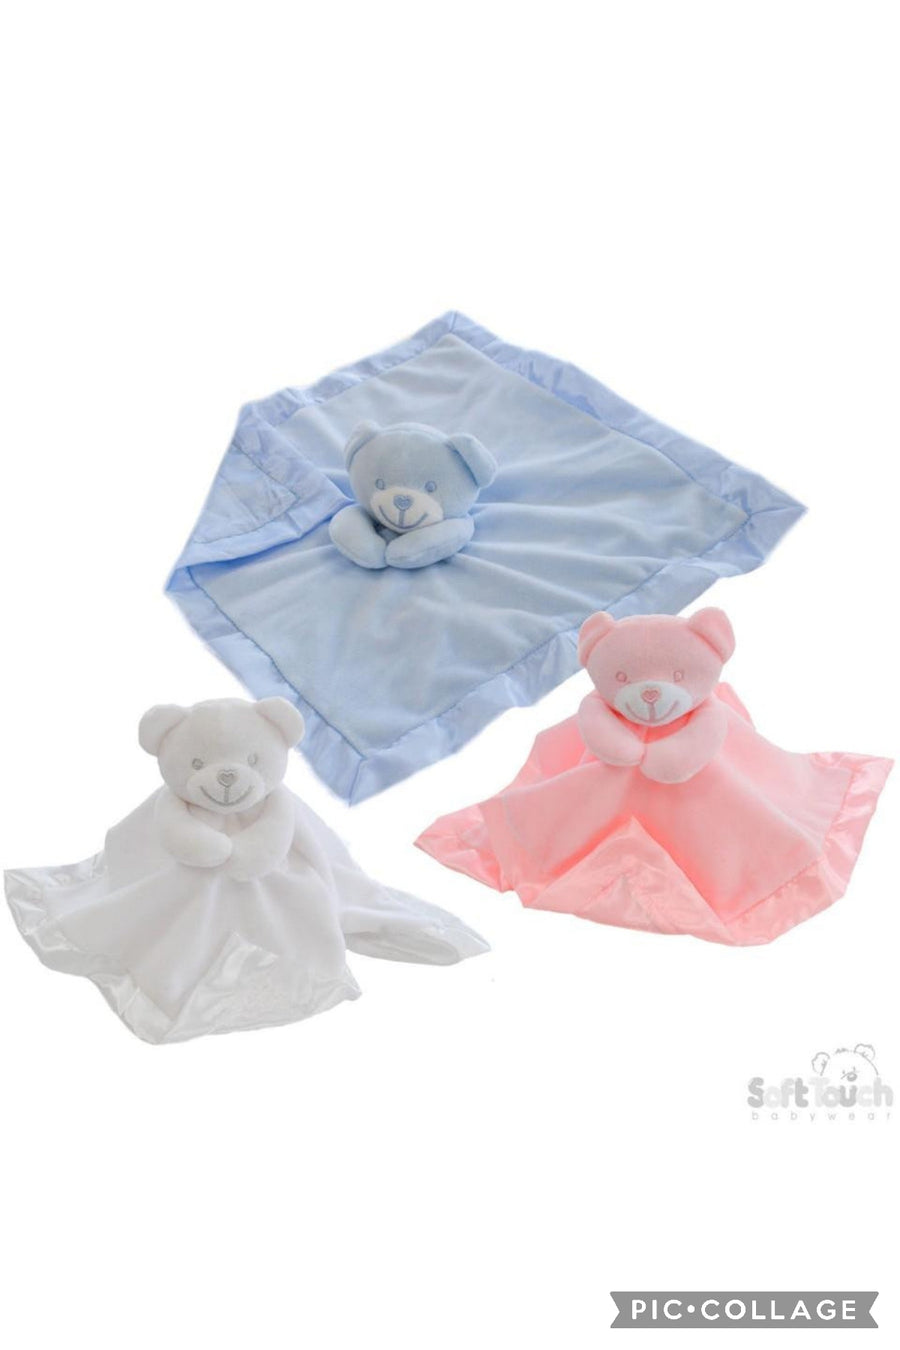 Baby Bear Comforter - White, Pink Or Blue